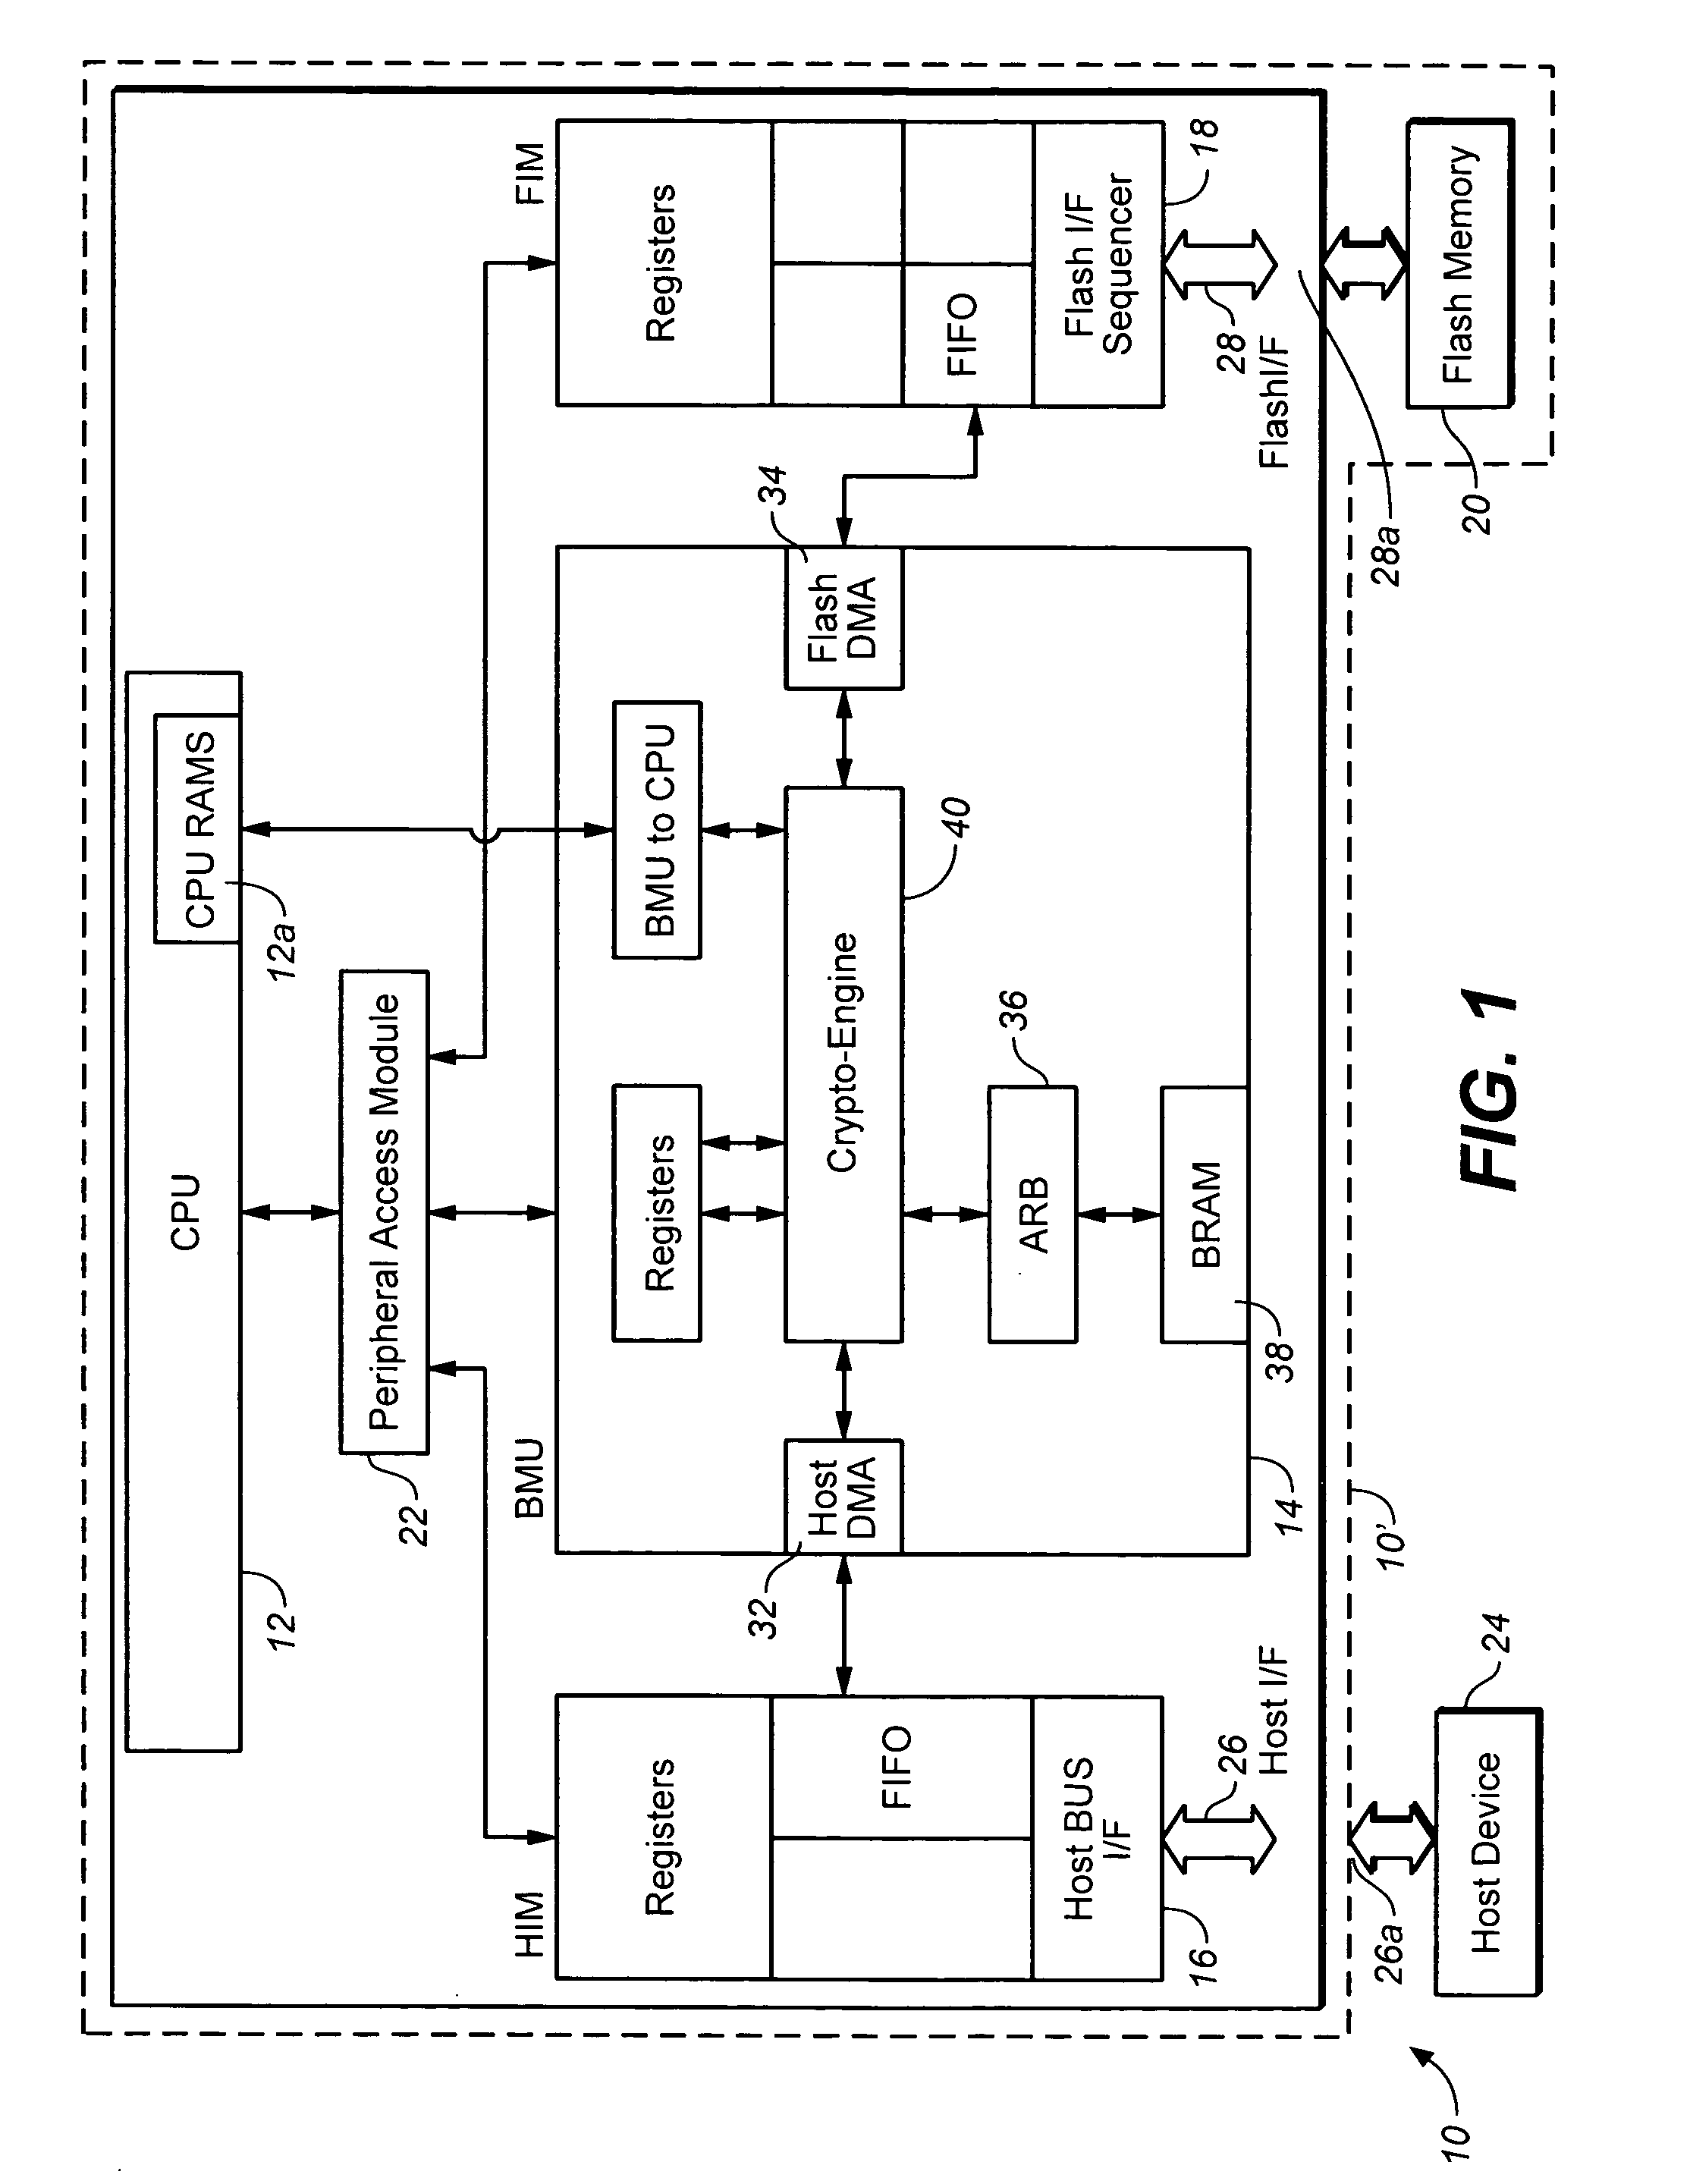 Mobile memory system for secure storage and delivery of media content